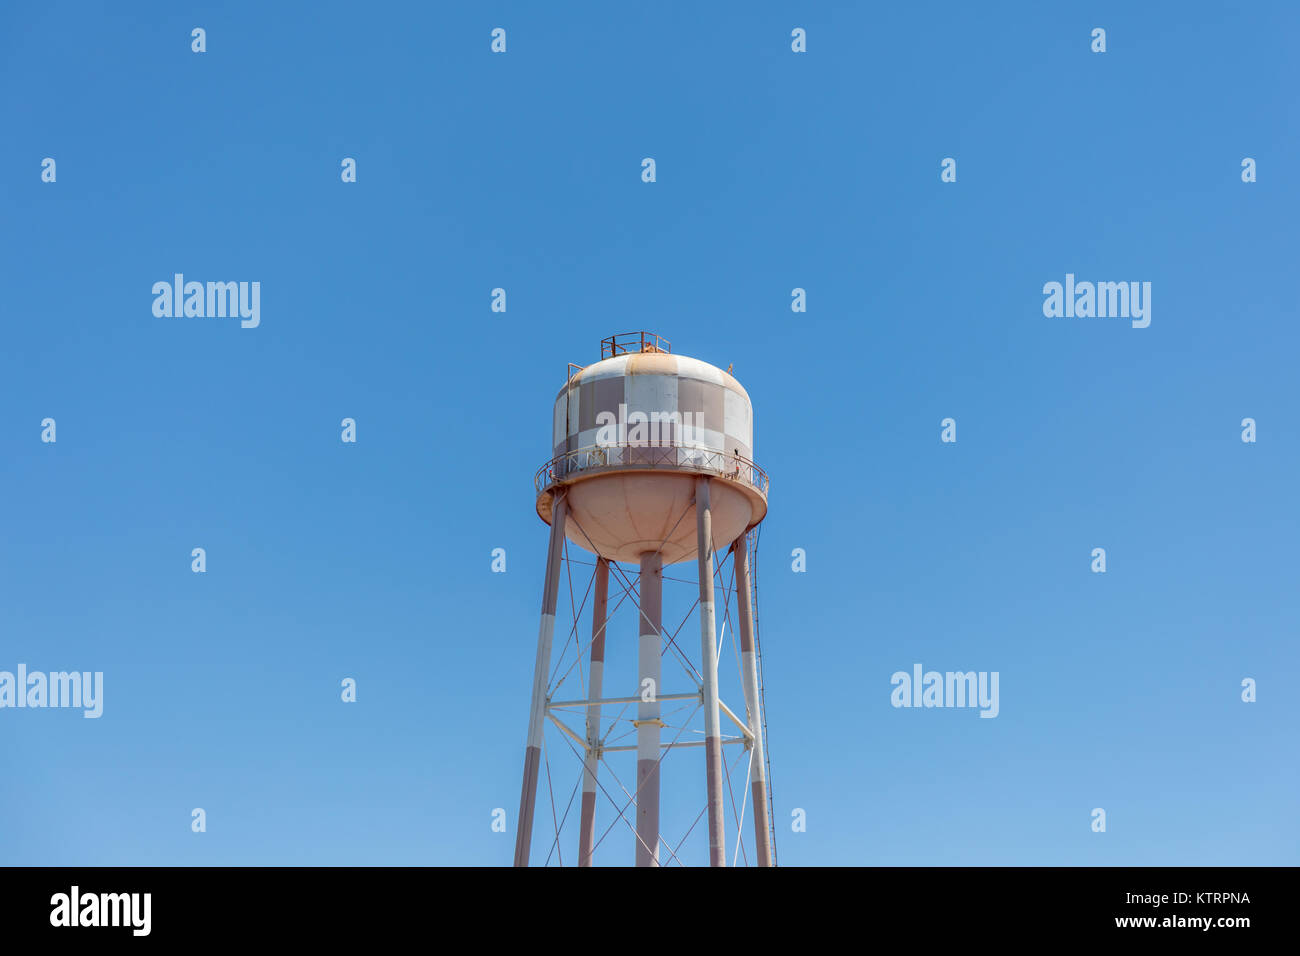 Water tower, red and white, Sunnyvale, California, USA Stock Photo